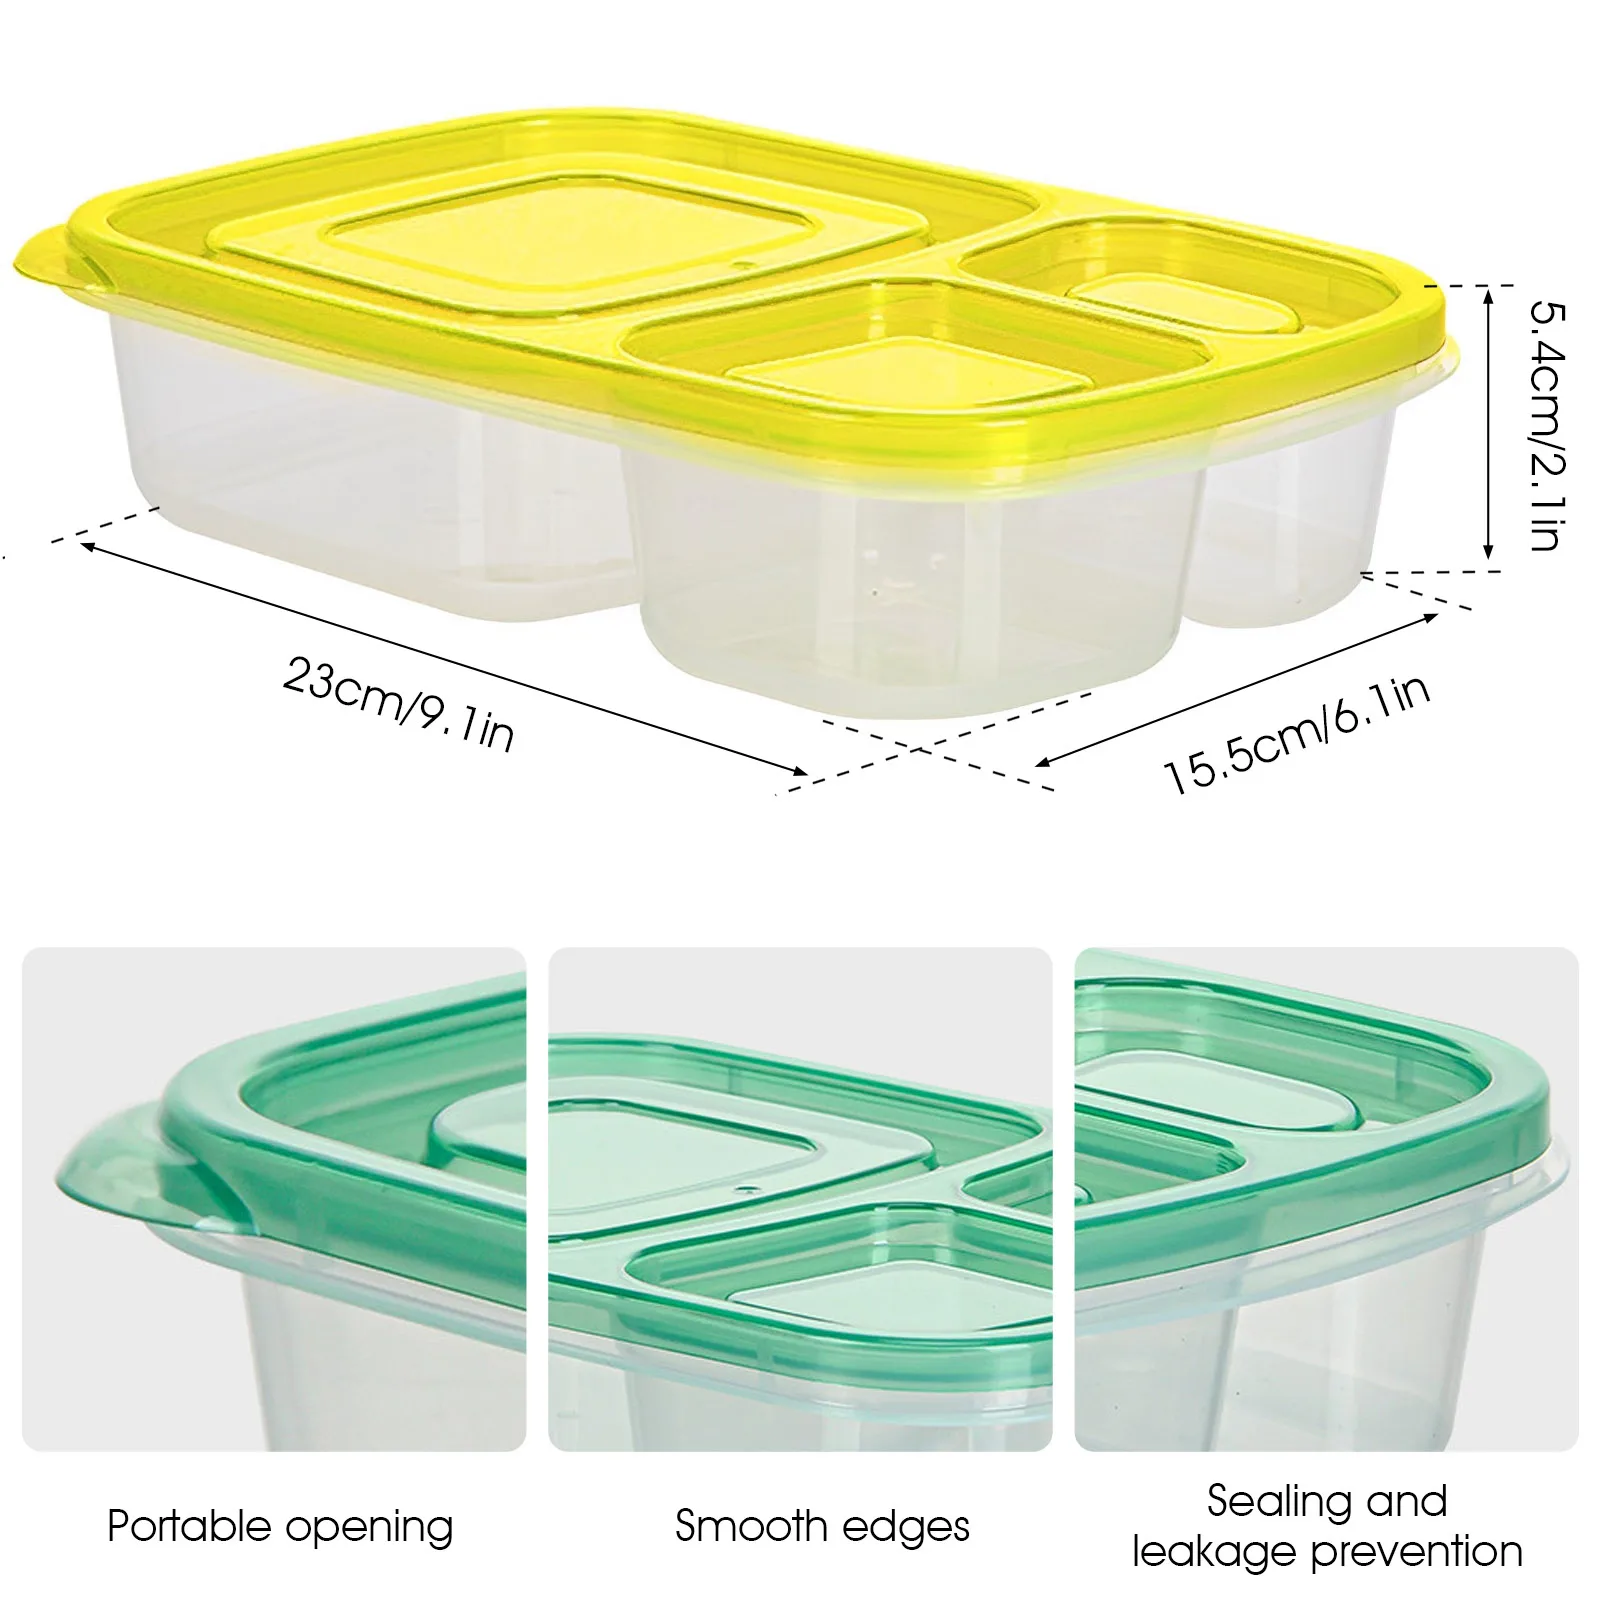 7PCS Stackable Mini Food Storage Container with Clip-on Lid